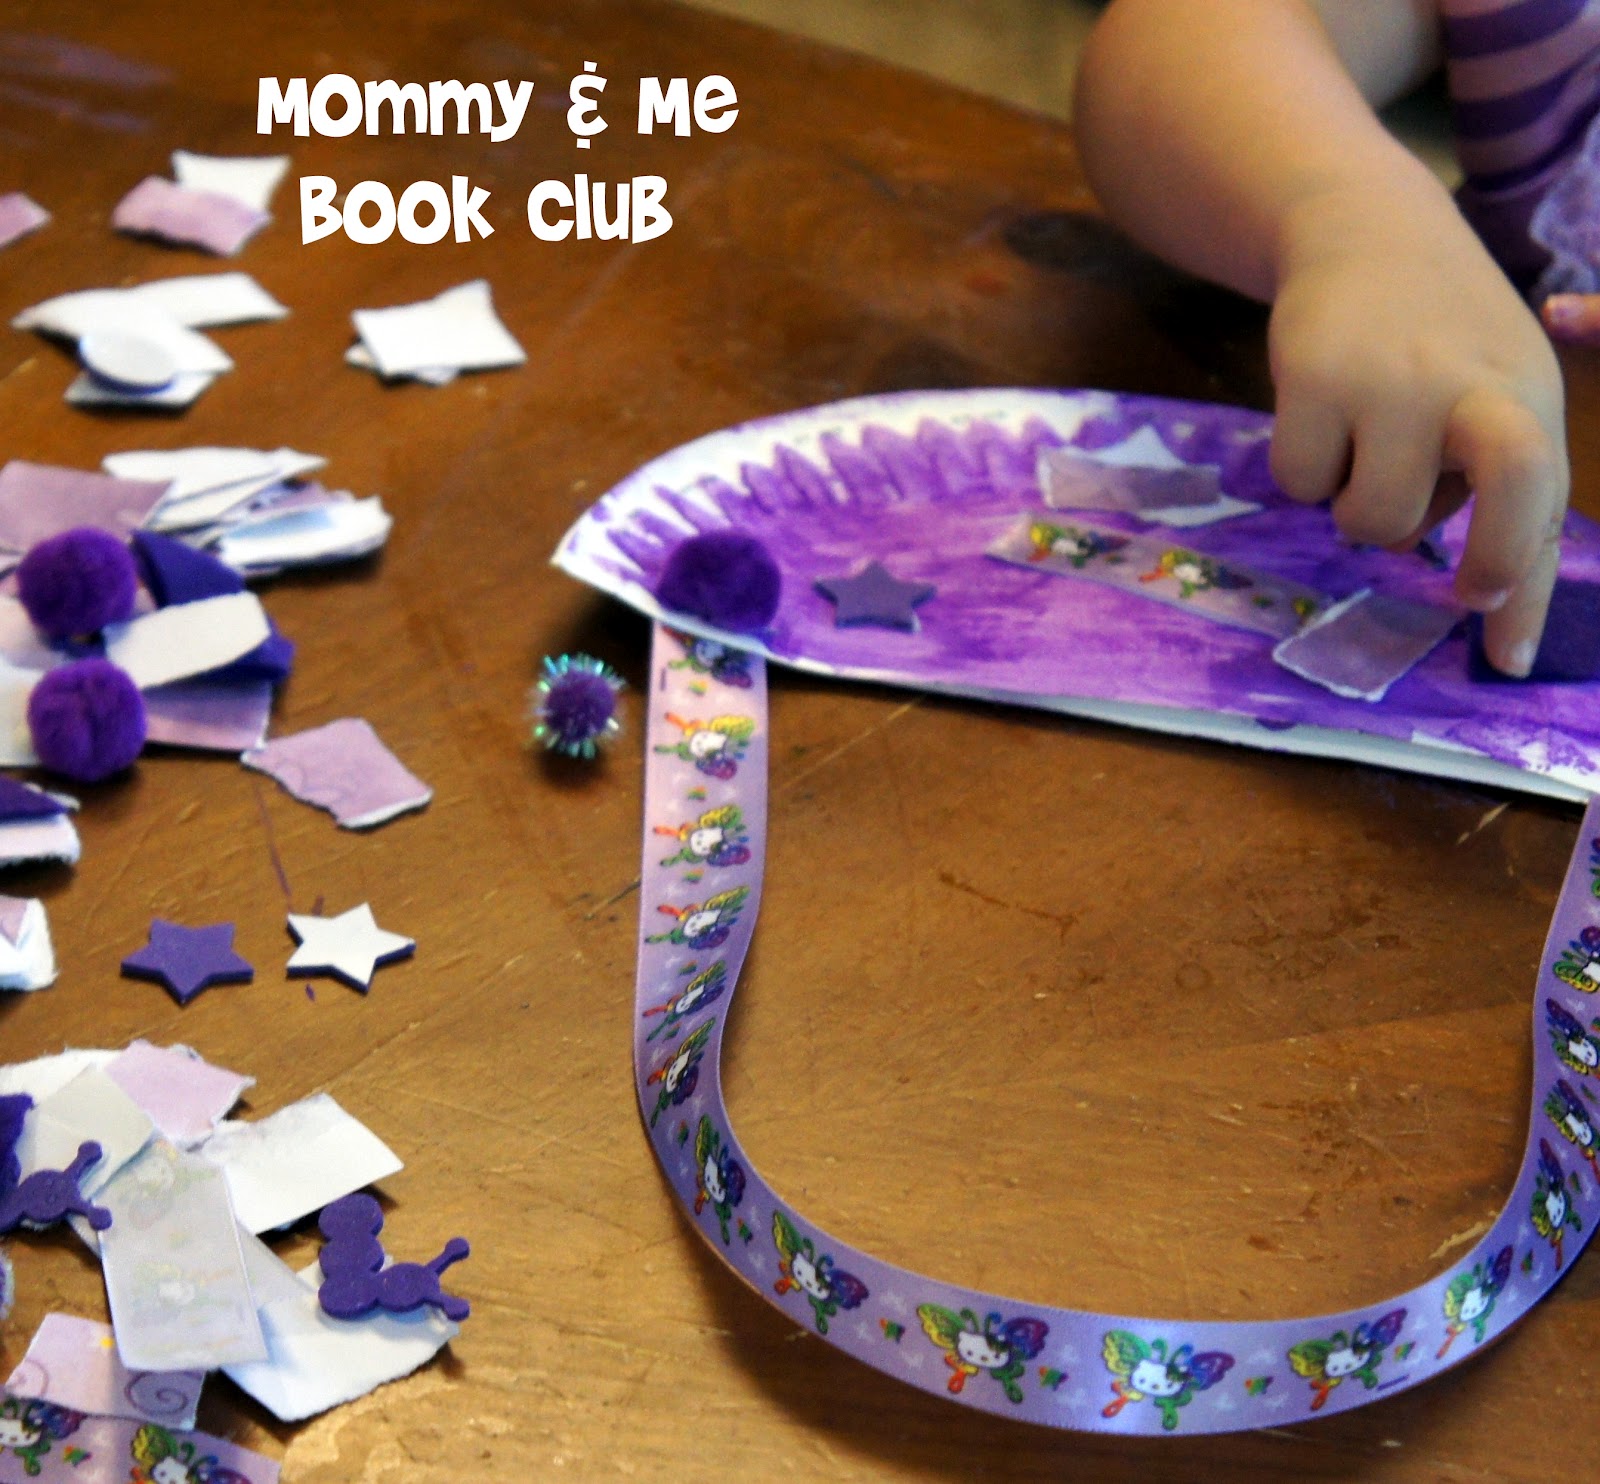 We glued on collage materials to decorate the outside of the purse.